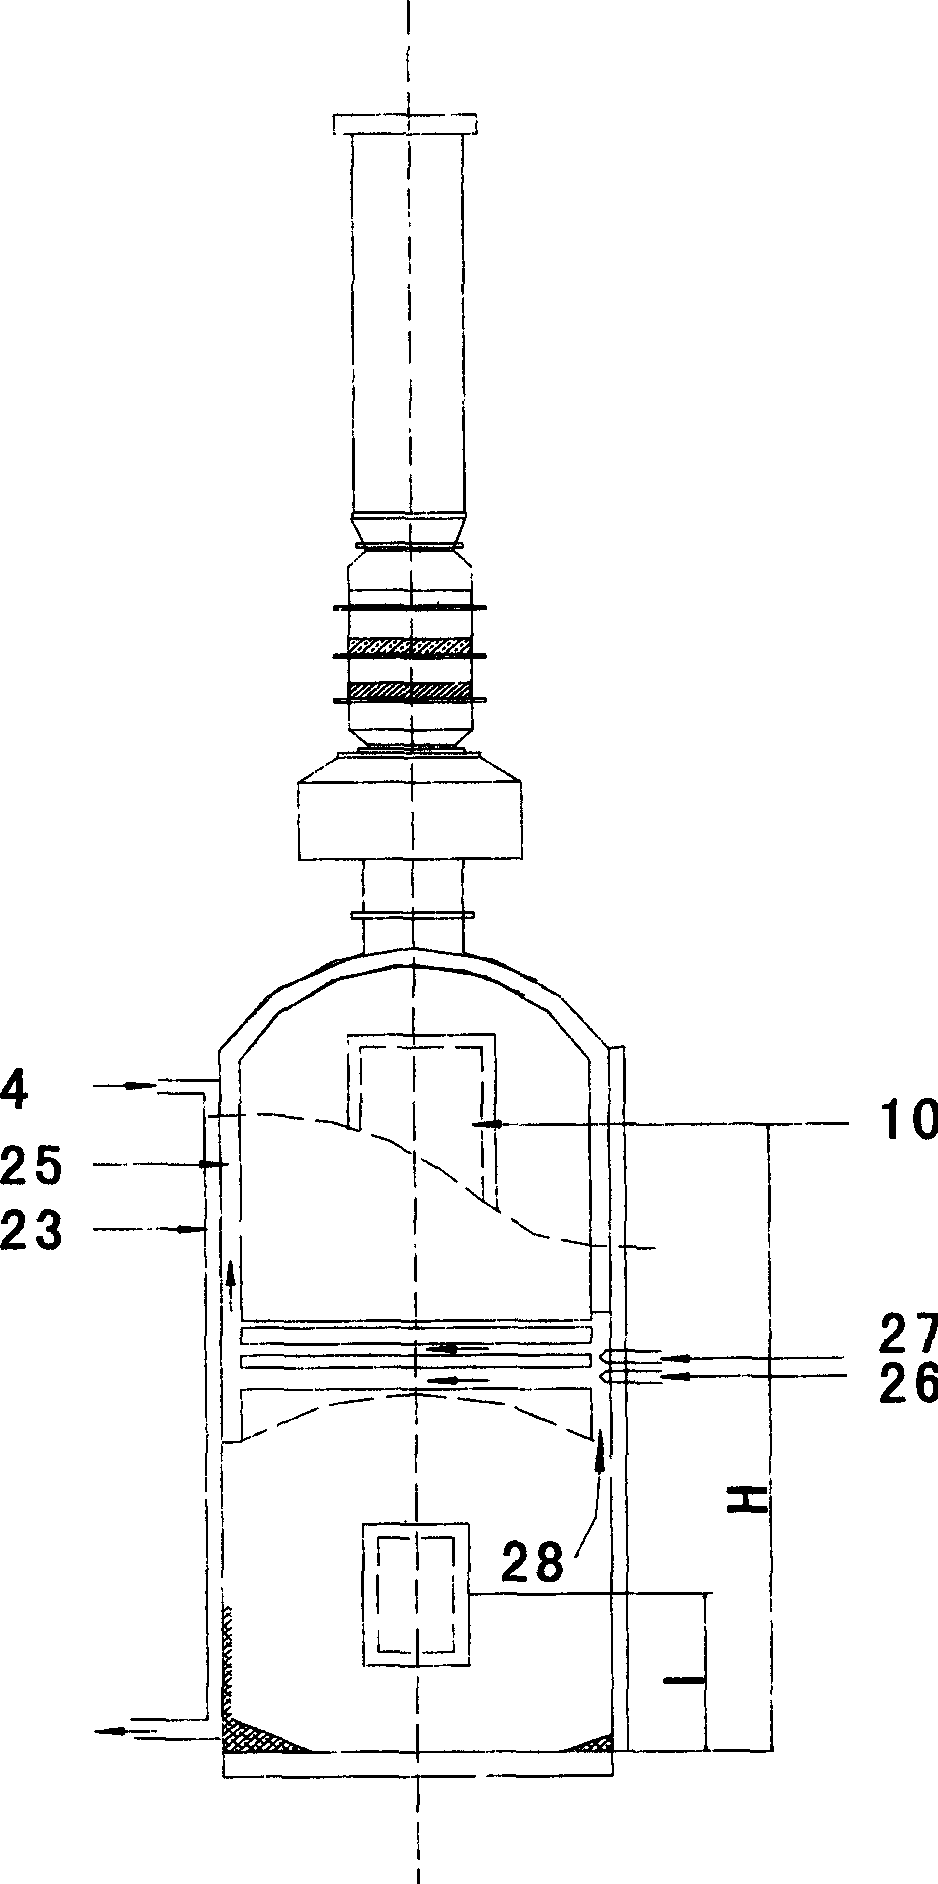 Medical refuse pyrolytic-gasification incineration apparatus